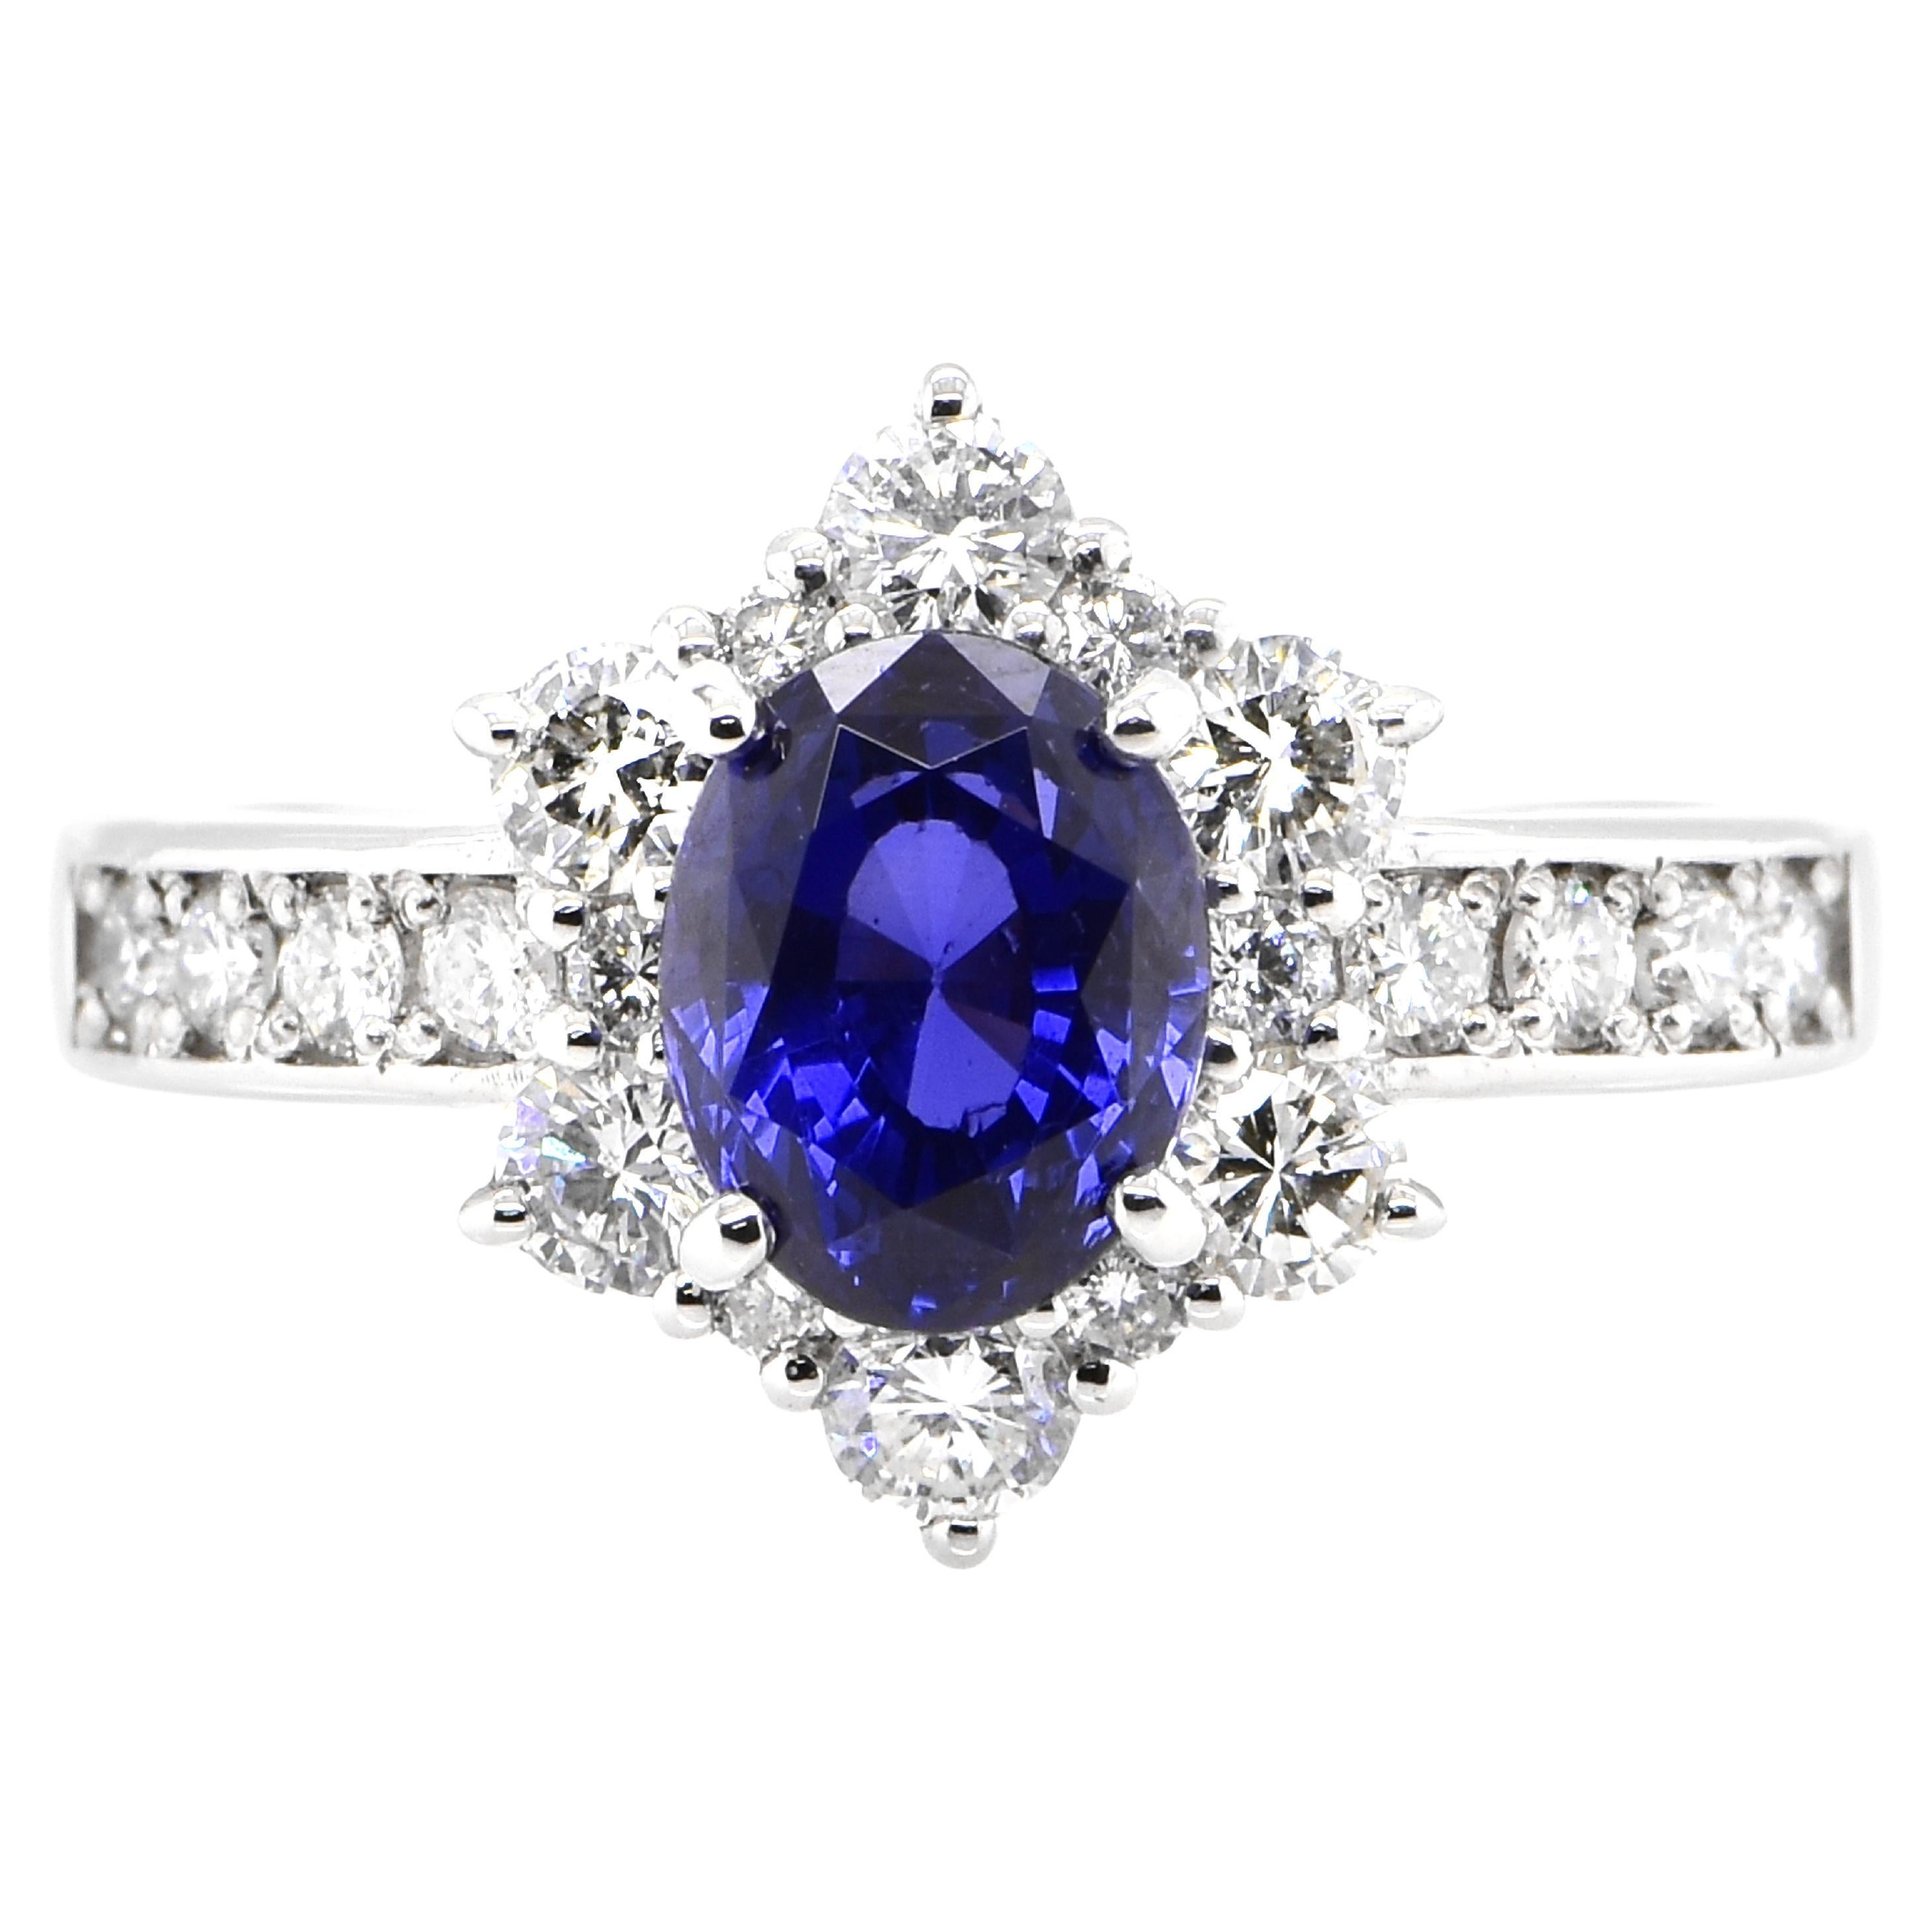 GIA Certified 2.02 Carat, Color-Change Sapphire and Diamond Ring set in Platinum